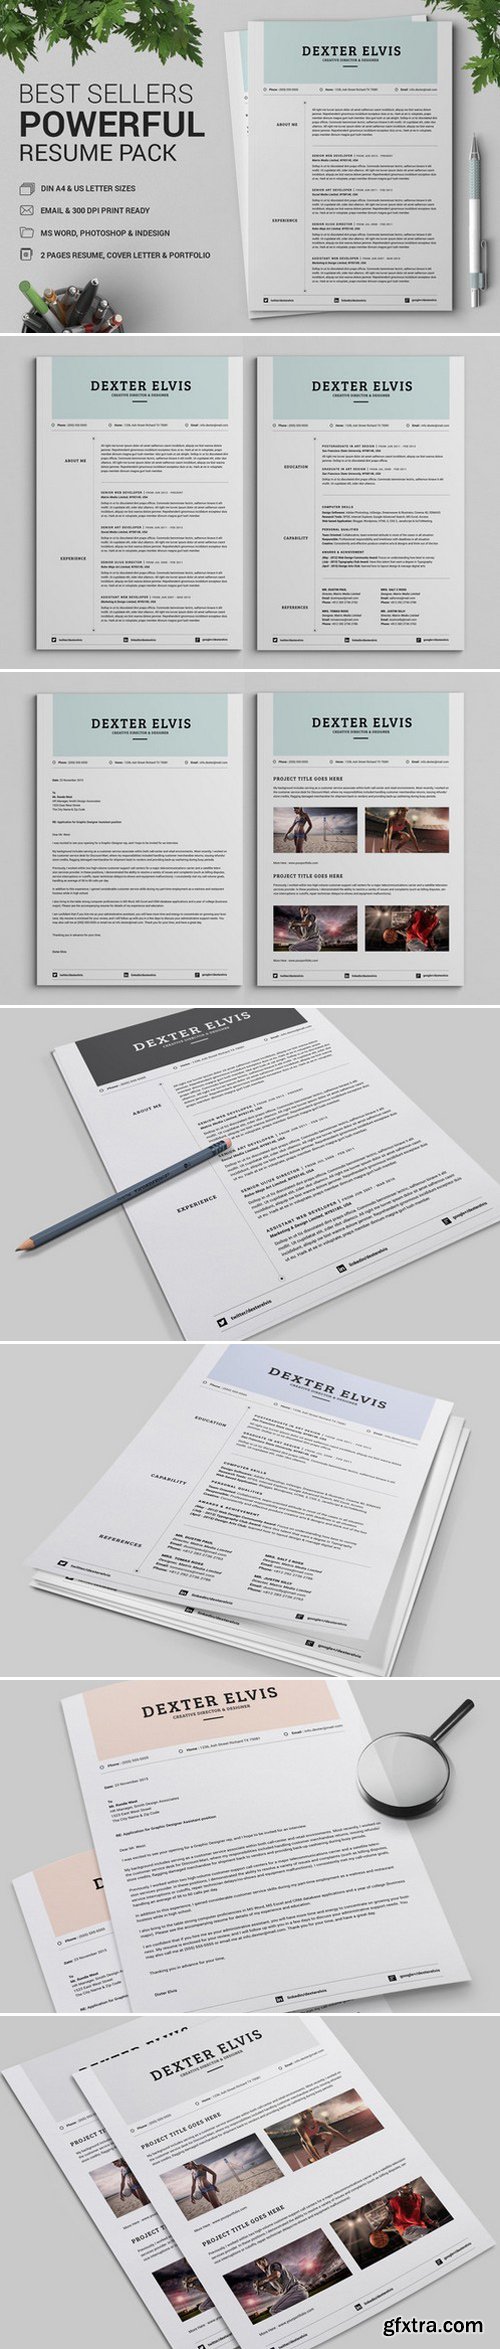 CM - Best Sellers 2 Pages Powerful Resume 401390